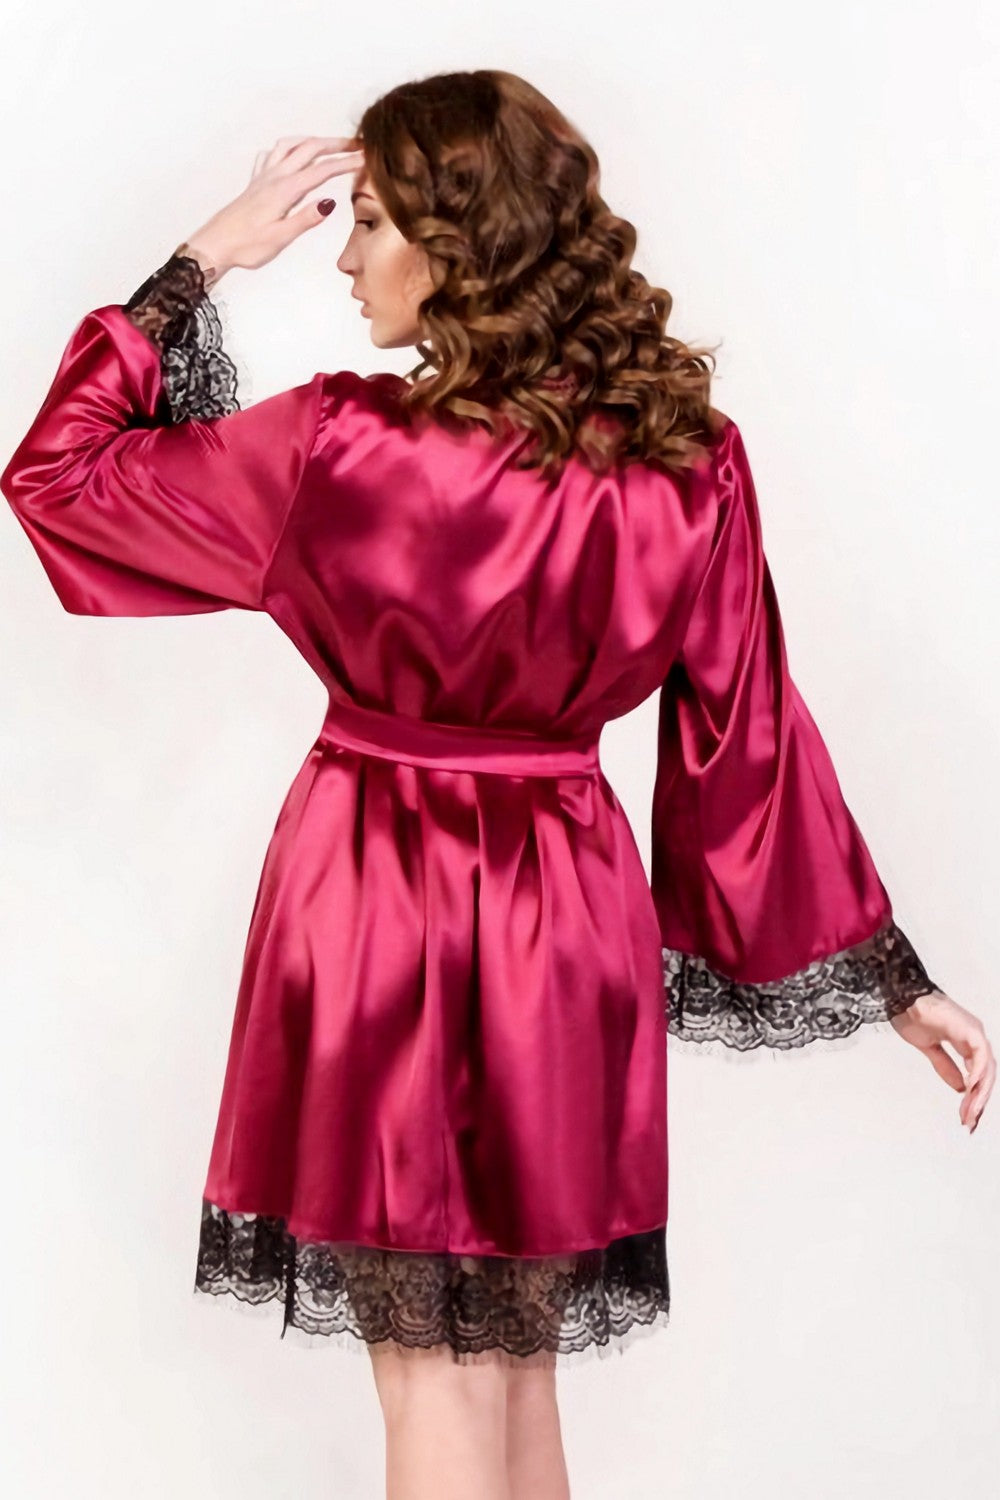 Short-Length Robe - Lace-Trim Sleeves and Luxurious Satin